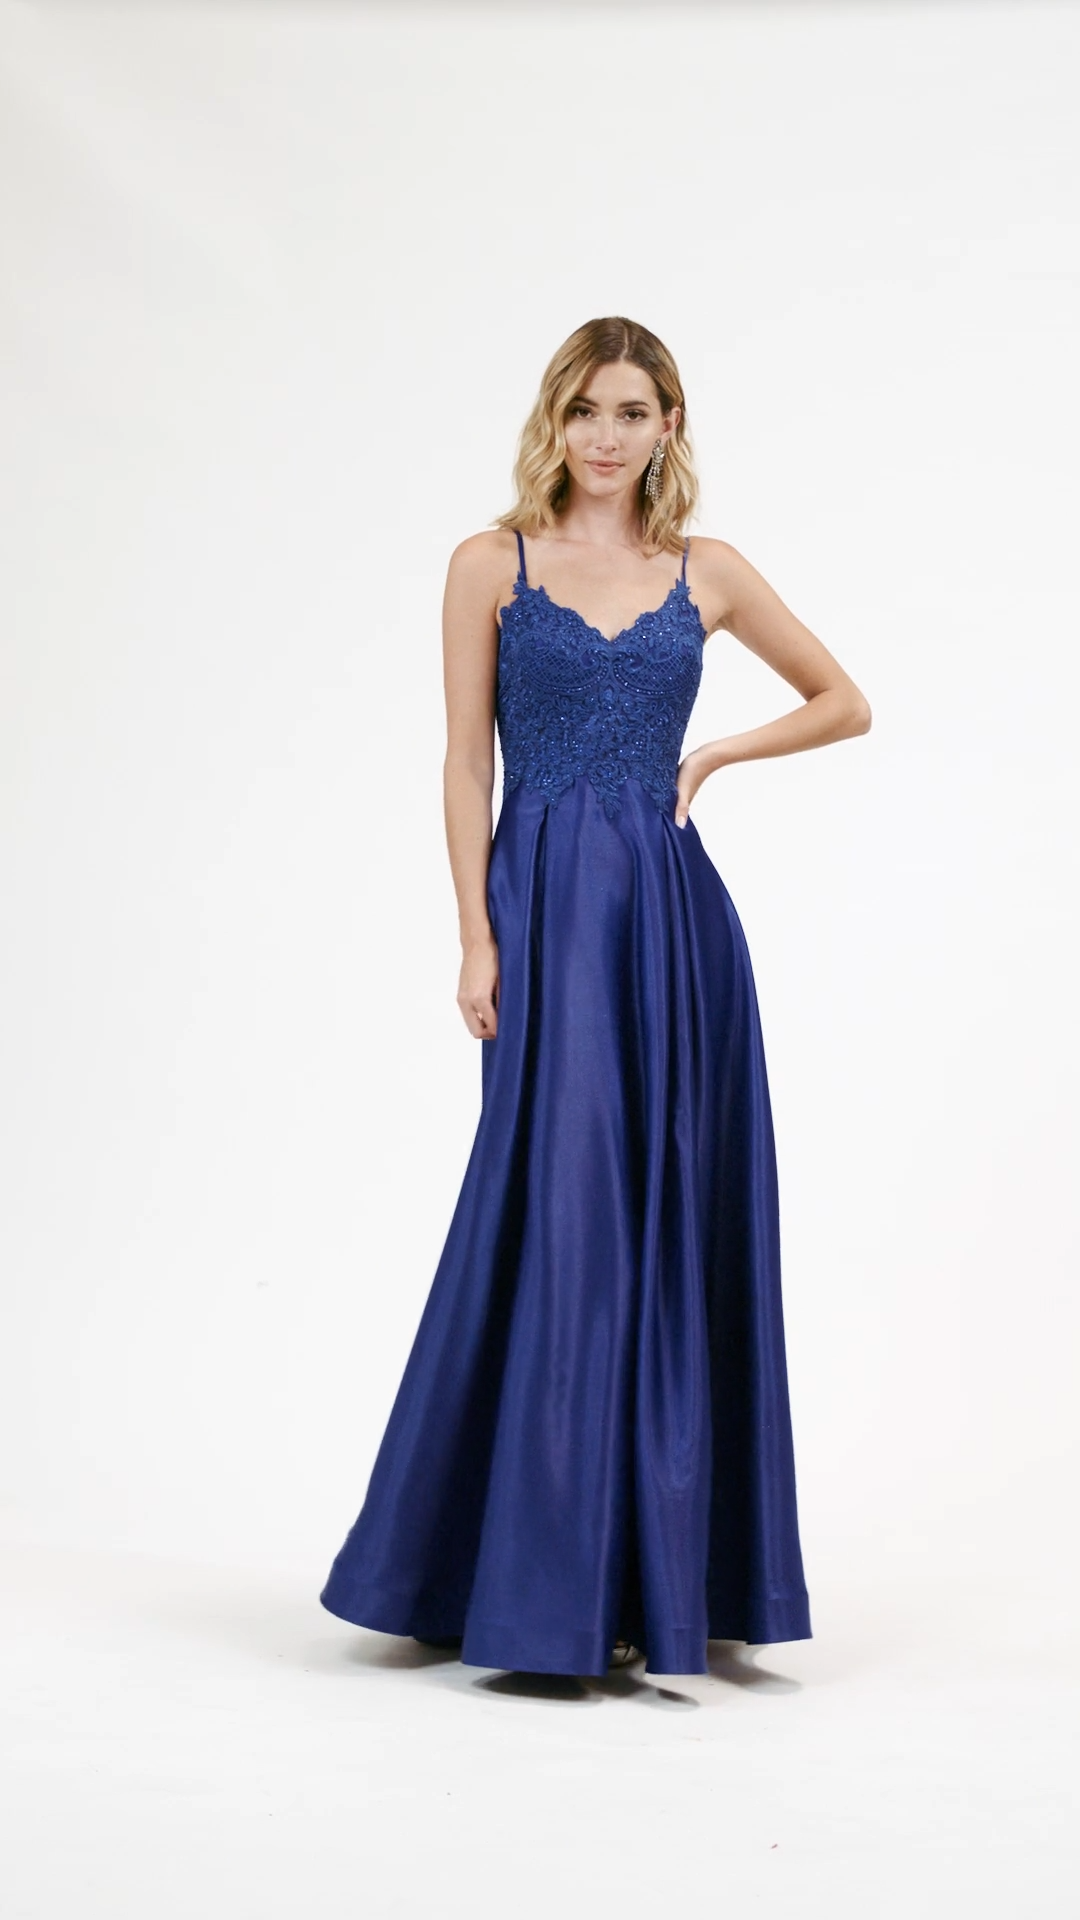 Val Stefani 3929RY fun and light weight satin and lace appliques A-line floor length formal gown